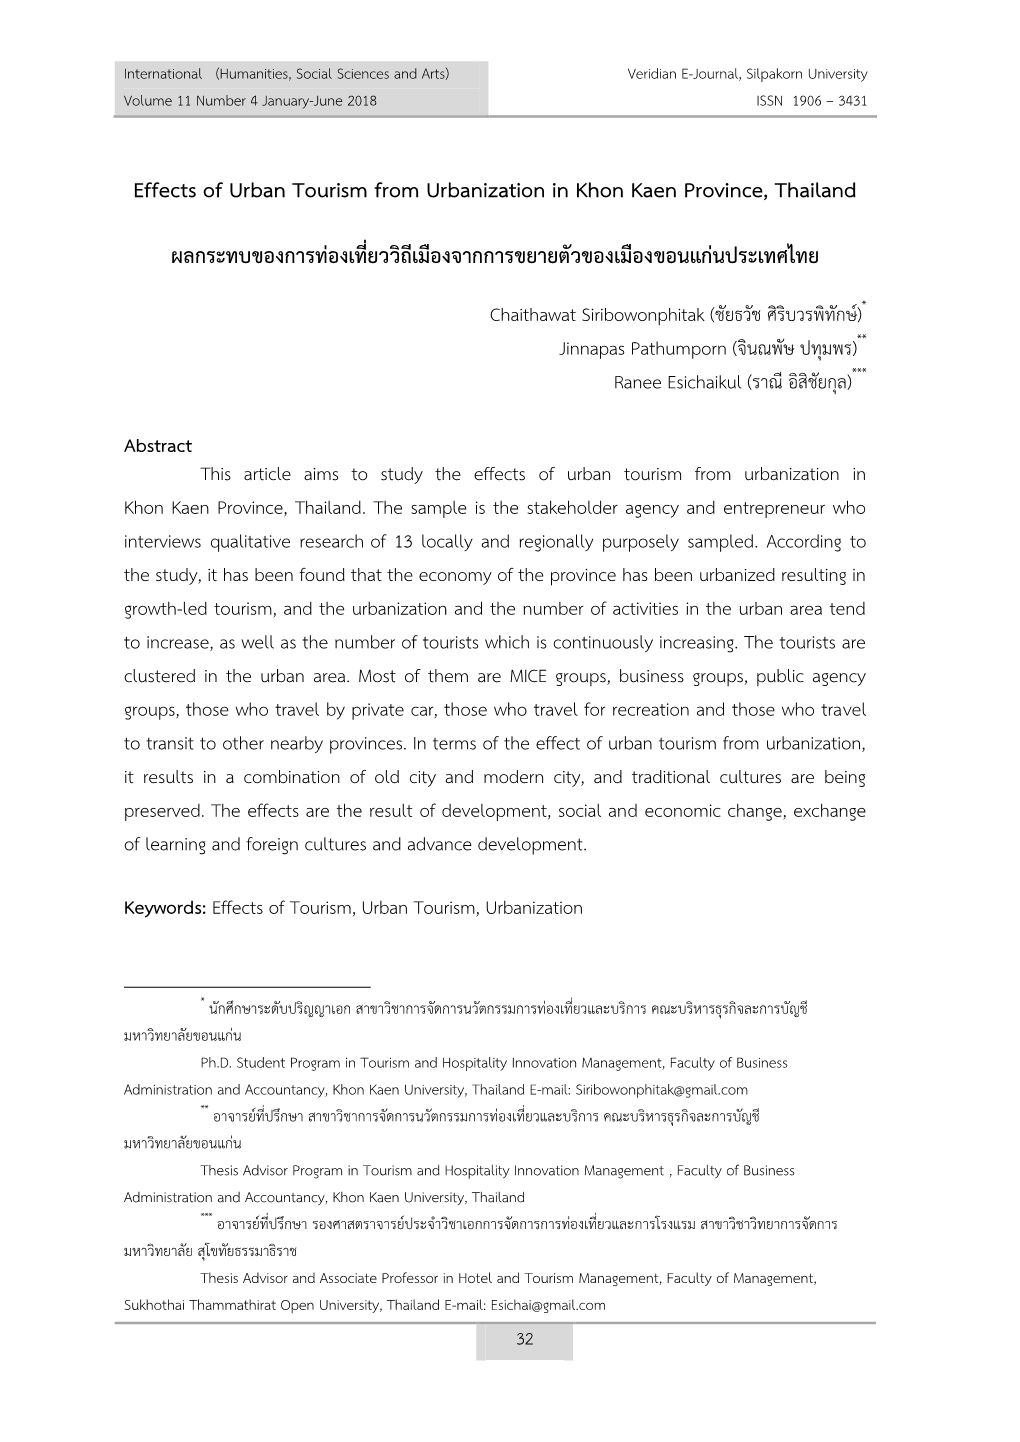 Effects of Urban Tourism from Urbanization in Khon Kaen Province, Thailand